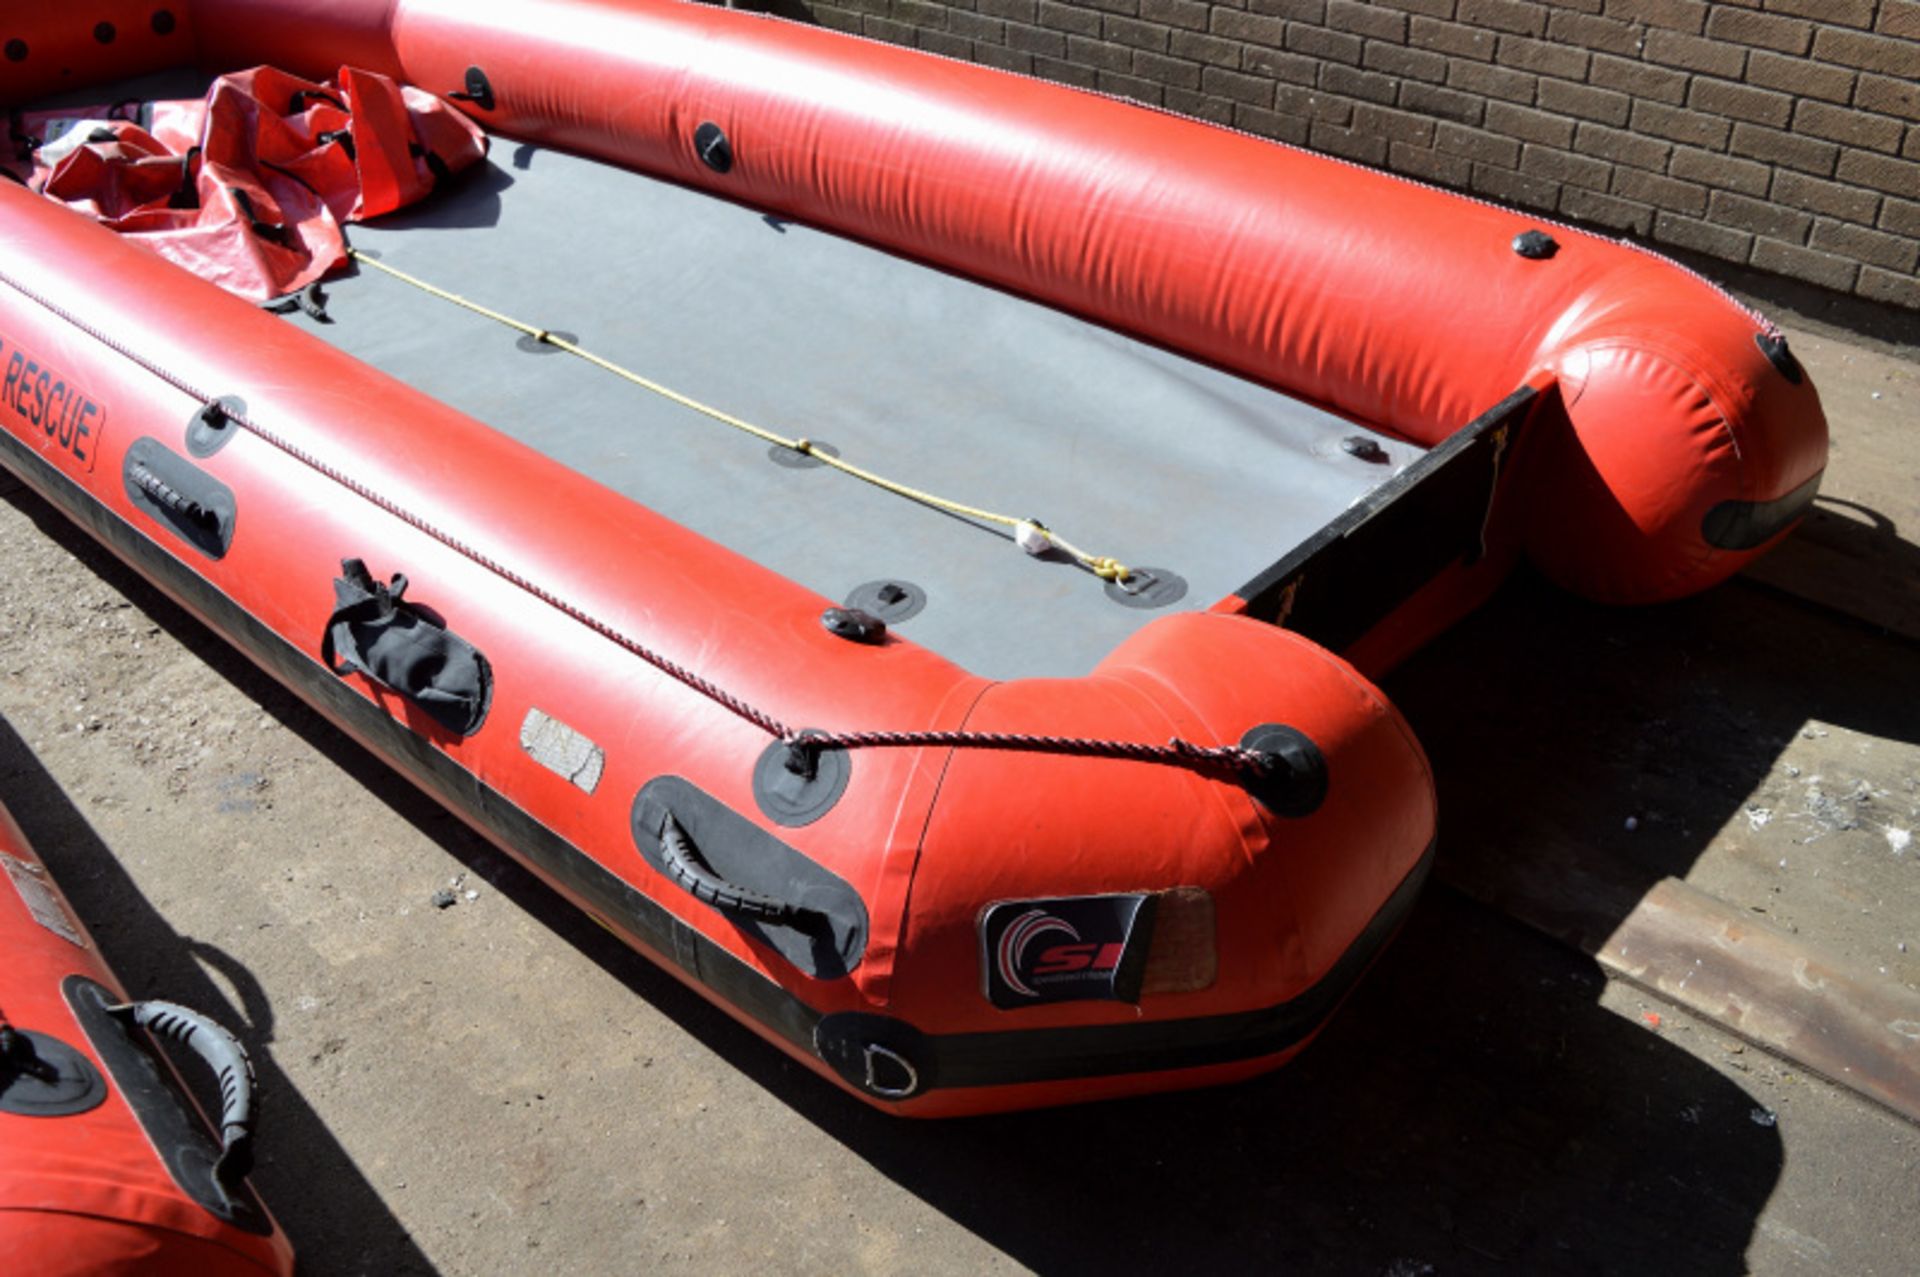 SIT Safequip ReqQraft Flood 15 inflatable boat - Image 8 of 11